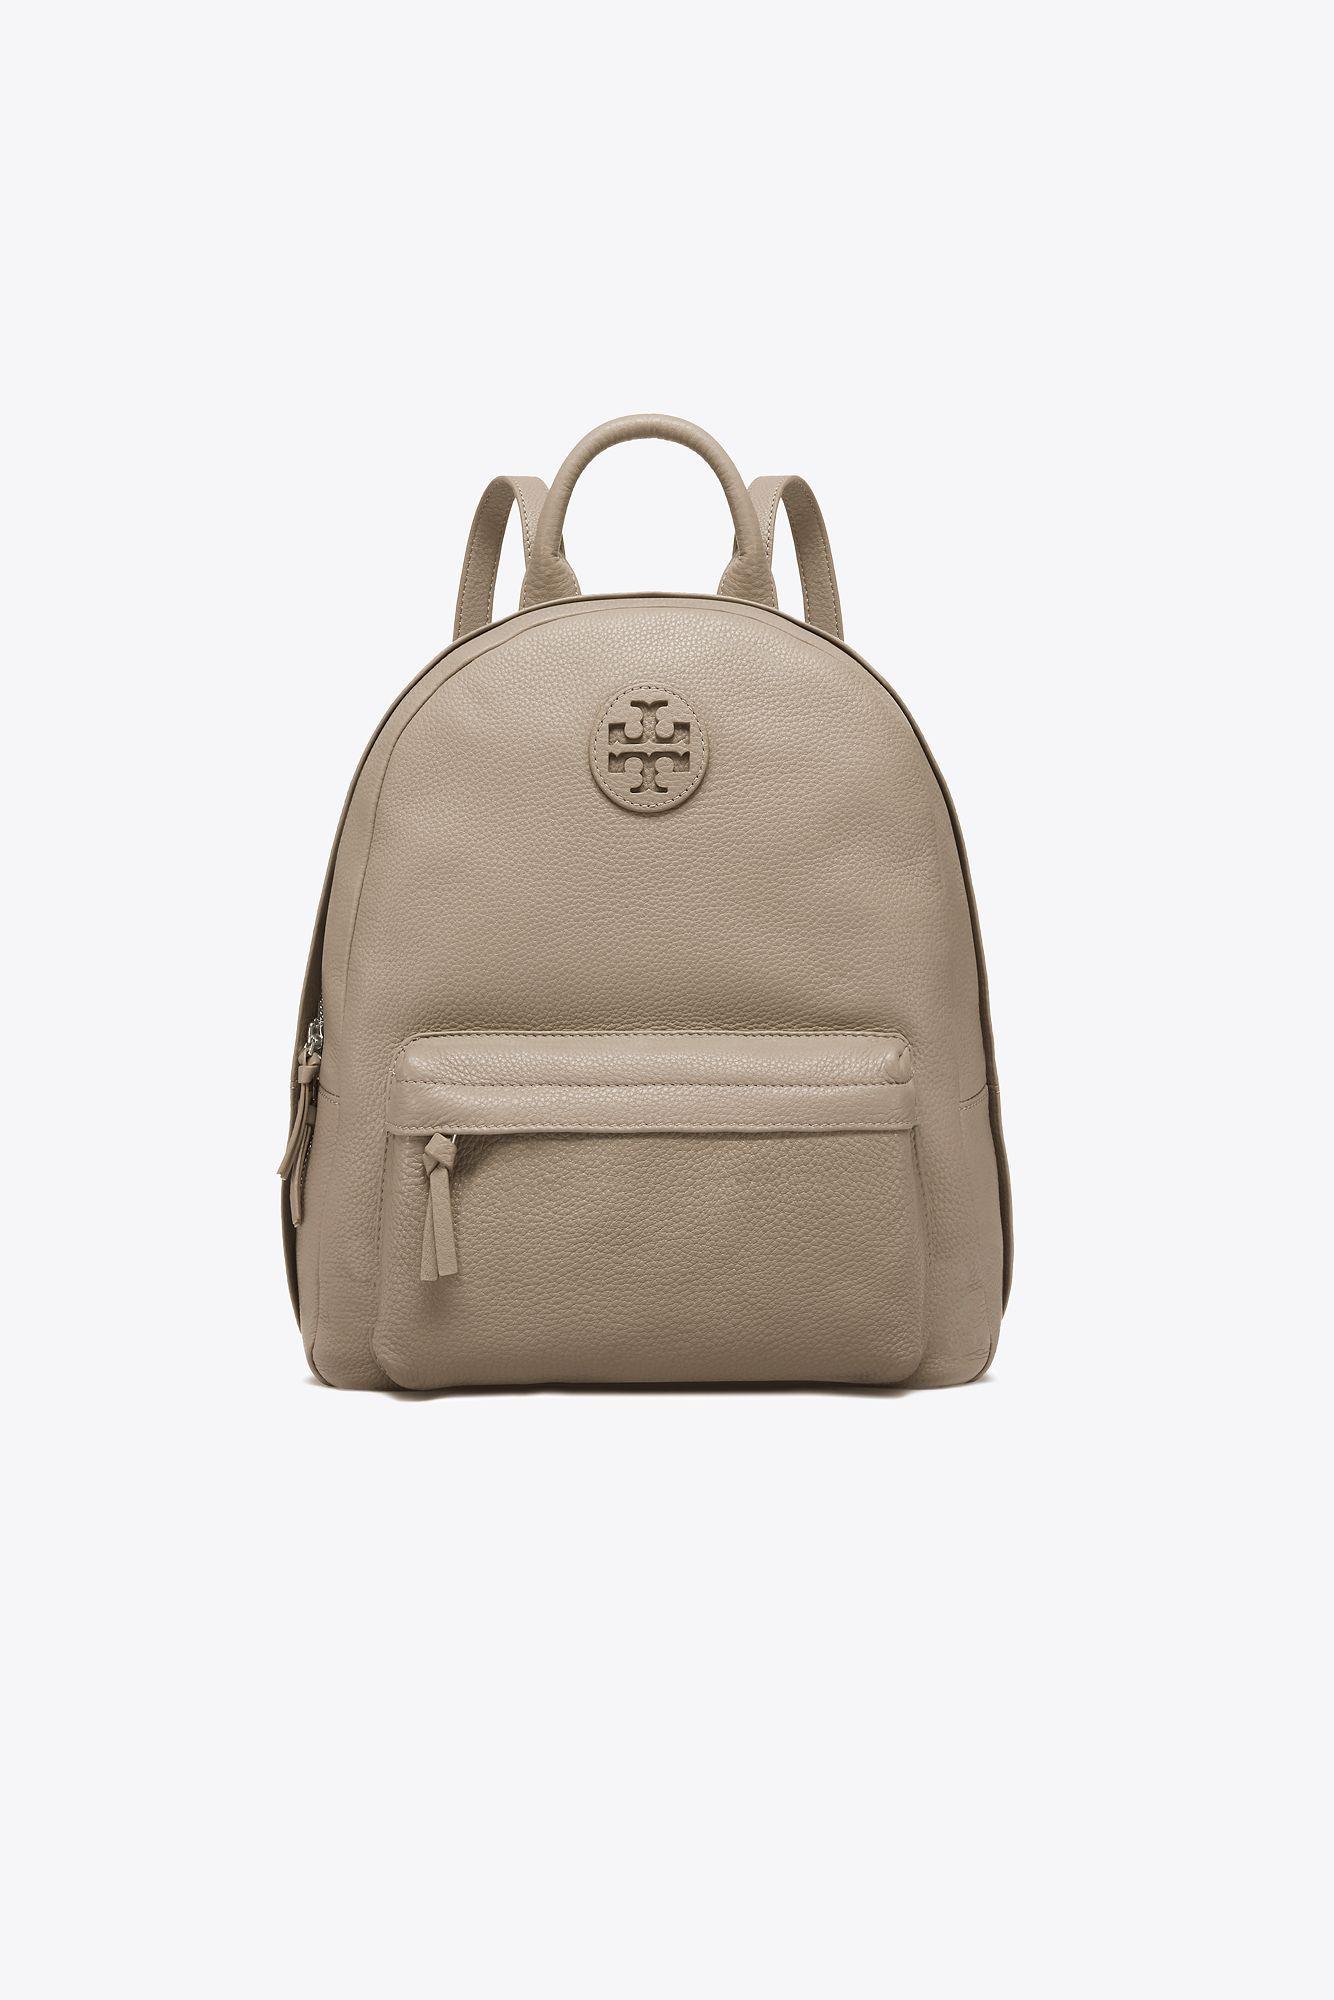 Tory Burch Leather Backpack in Gray | Lyst